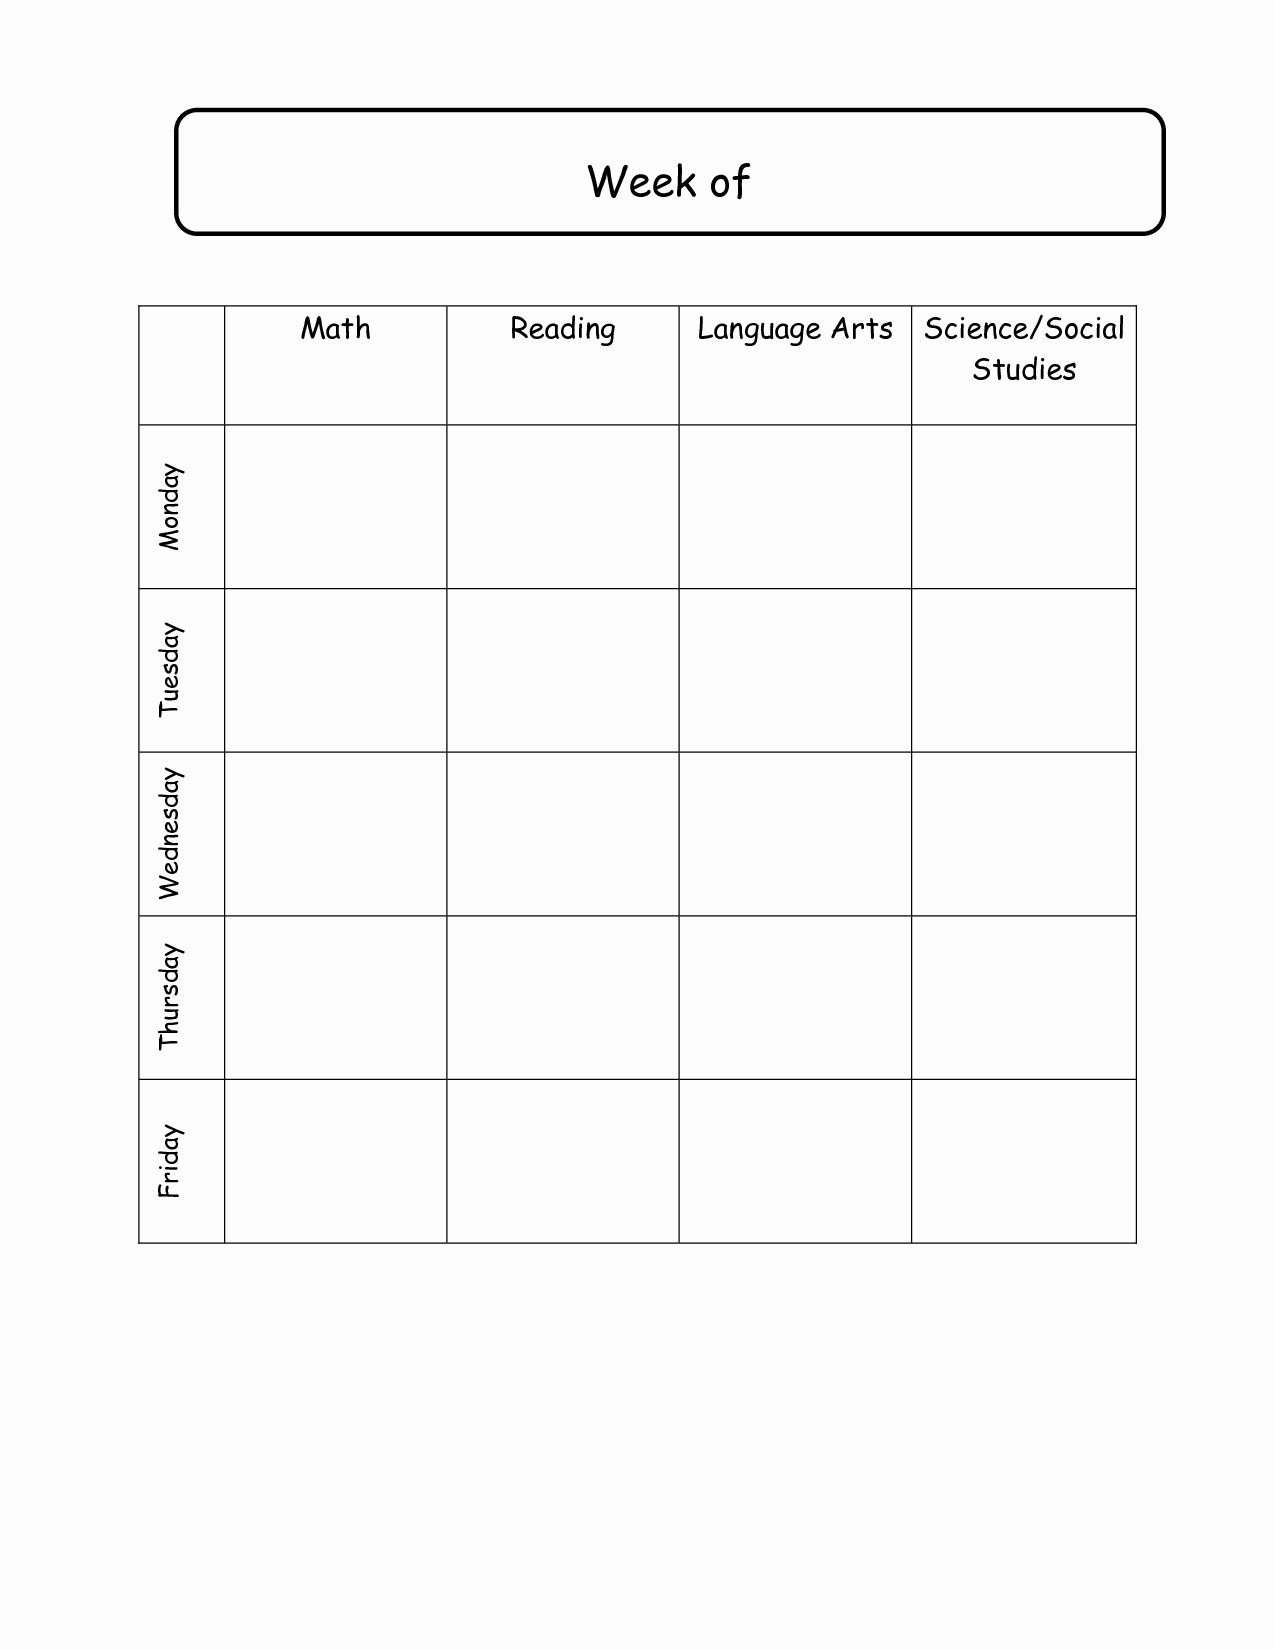 Weekly Lesson Plan Template Elementary Lovely Elementary School Daily Schedule Template